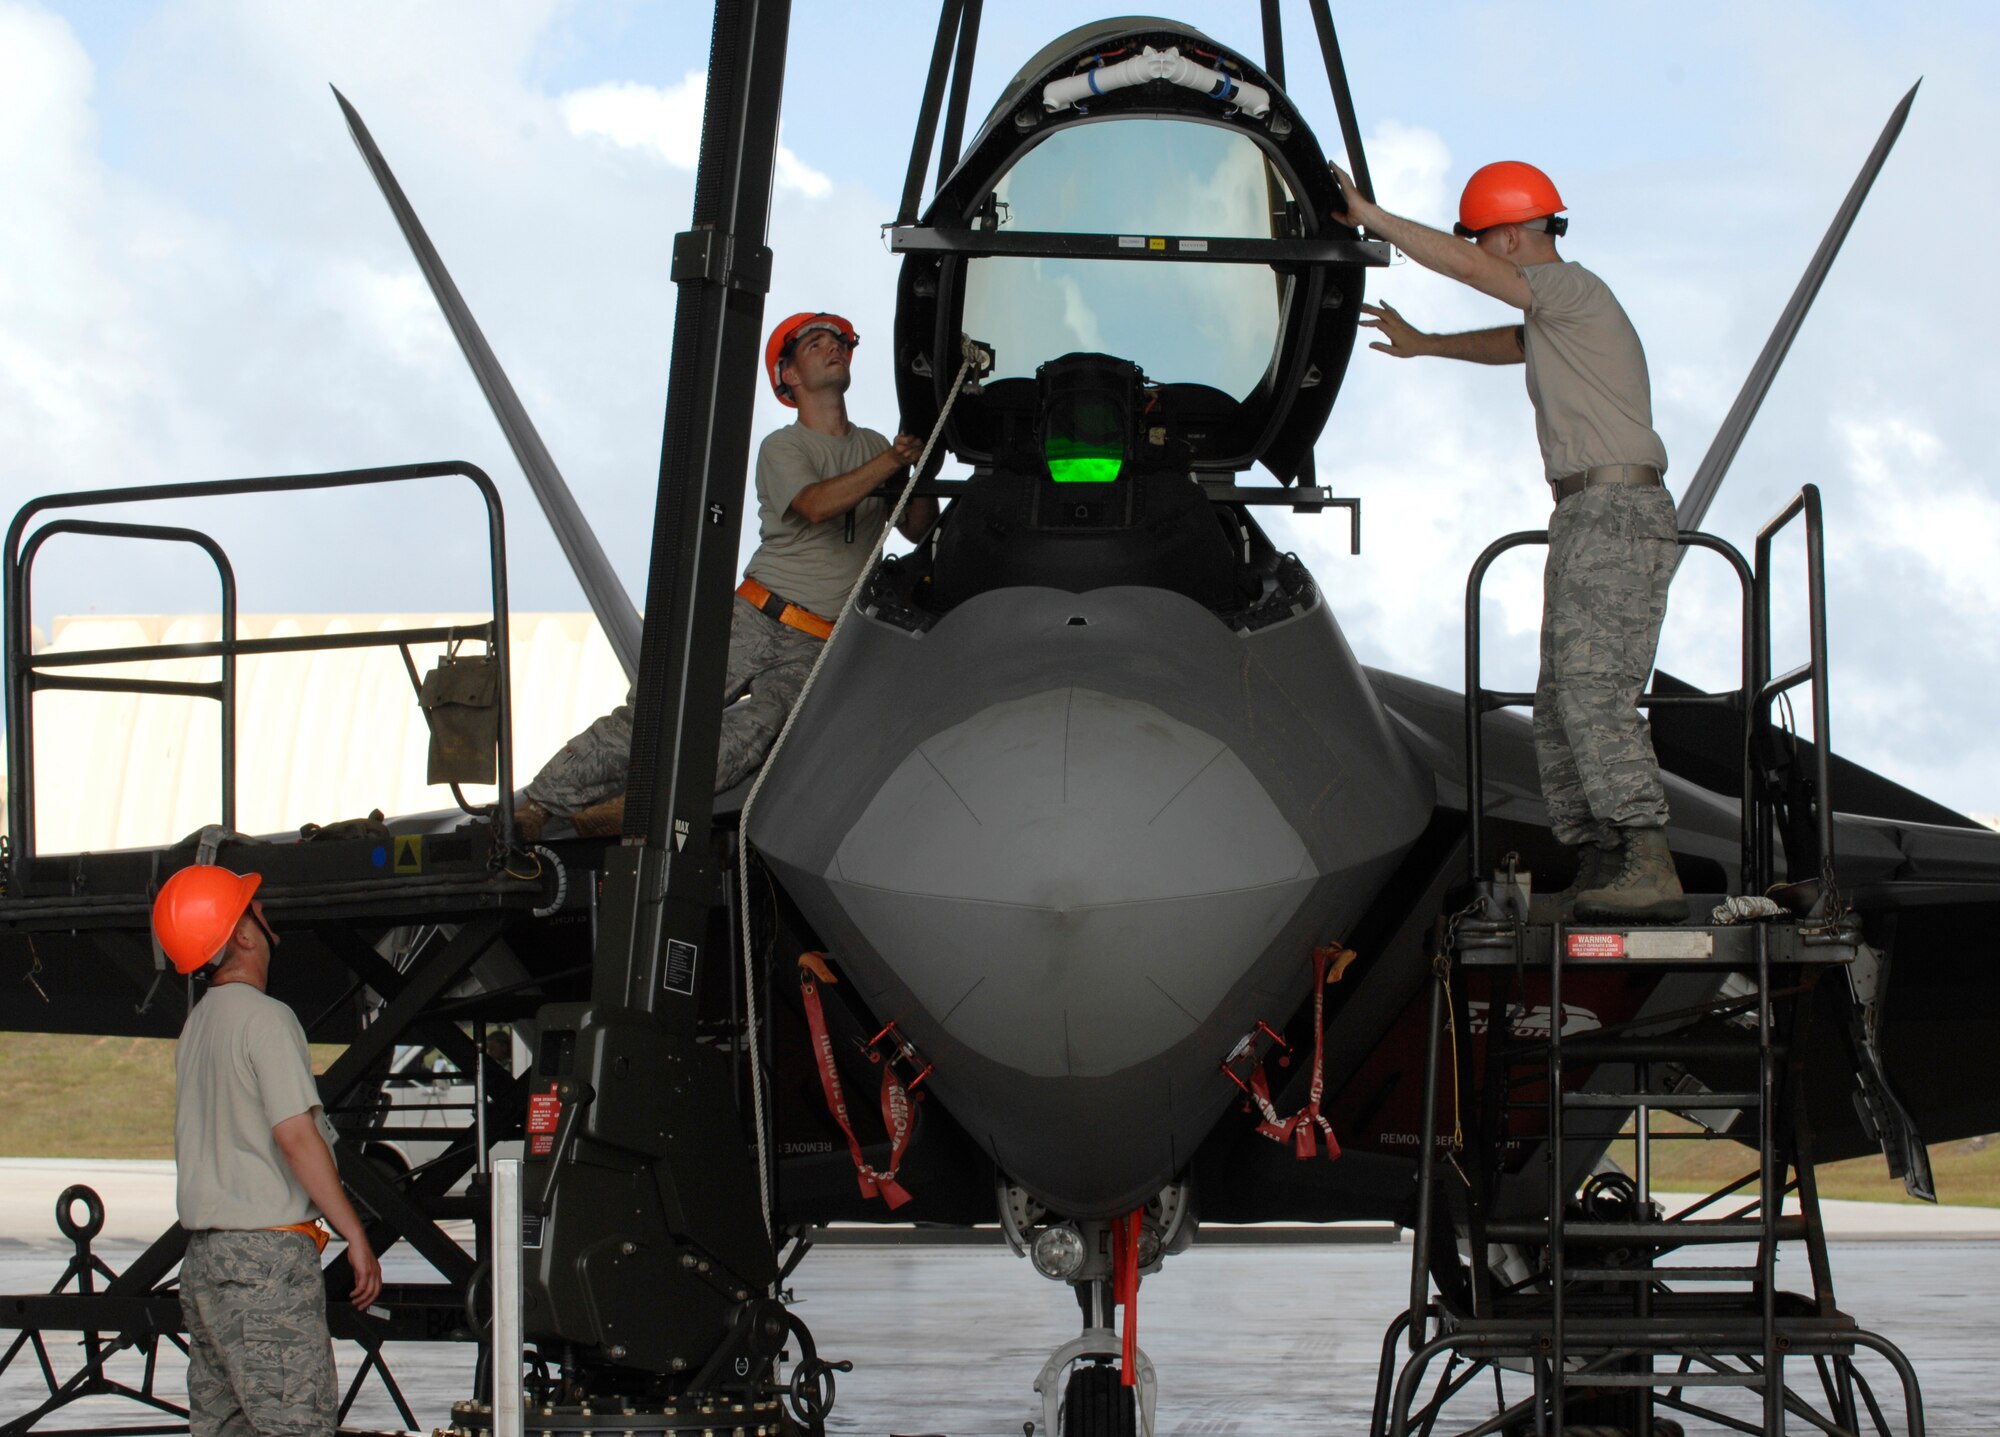 (L-R) Staff Sgt. Terry Vickery, Staff Sgt. Tim Sullivan, and Senior Airman Ryan Ott, 
install an F-22 Raptor canopy using an east-west hoist Feb. 18 at Andersen Air Force Base, Guam. The Raptors are deployed from Elmendorf Air Force Base, Alaska, to Guam , for three months as the Pacific's Theater Security Package. The stealth-fighters, along with associated maintenance and support personnel, comprise the 90th Fighter Squadron and will participate in various exercises that provide routine training in an environment different from their home station. All are F-22 Egress and Systems specialists, deployed from Elmendorf and assigned to the 36th Expeditionary Maintenance Squadron.


(U.S. Air Force photo/ Master Sgt. Kevin J. Gruenwald) released


